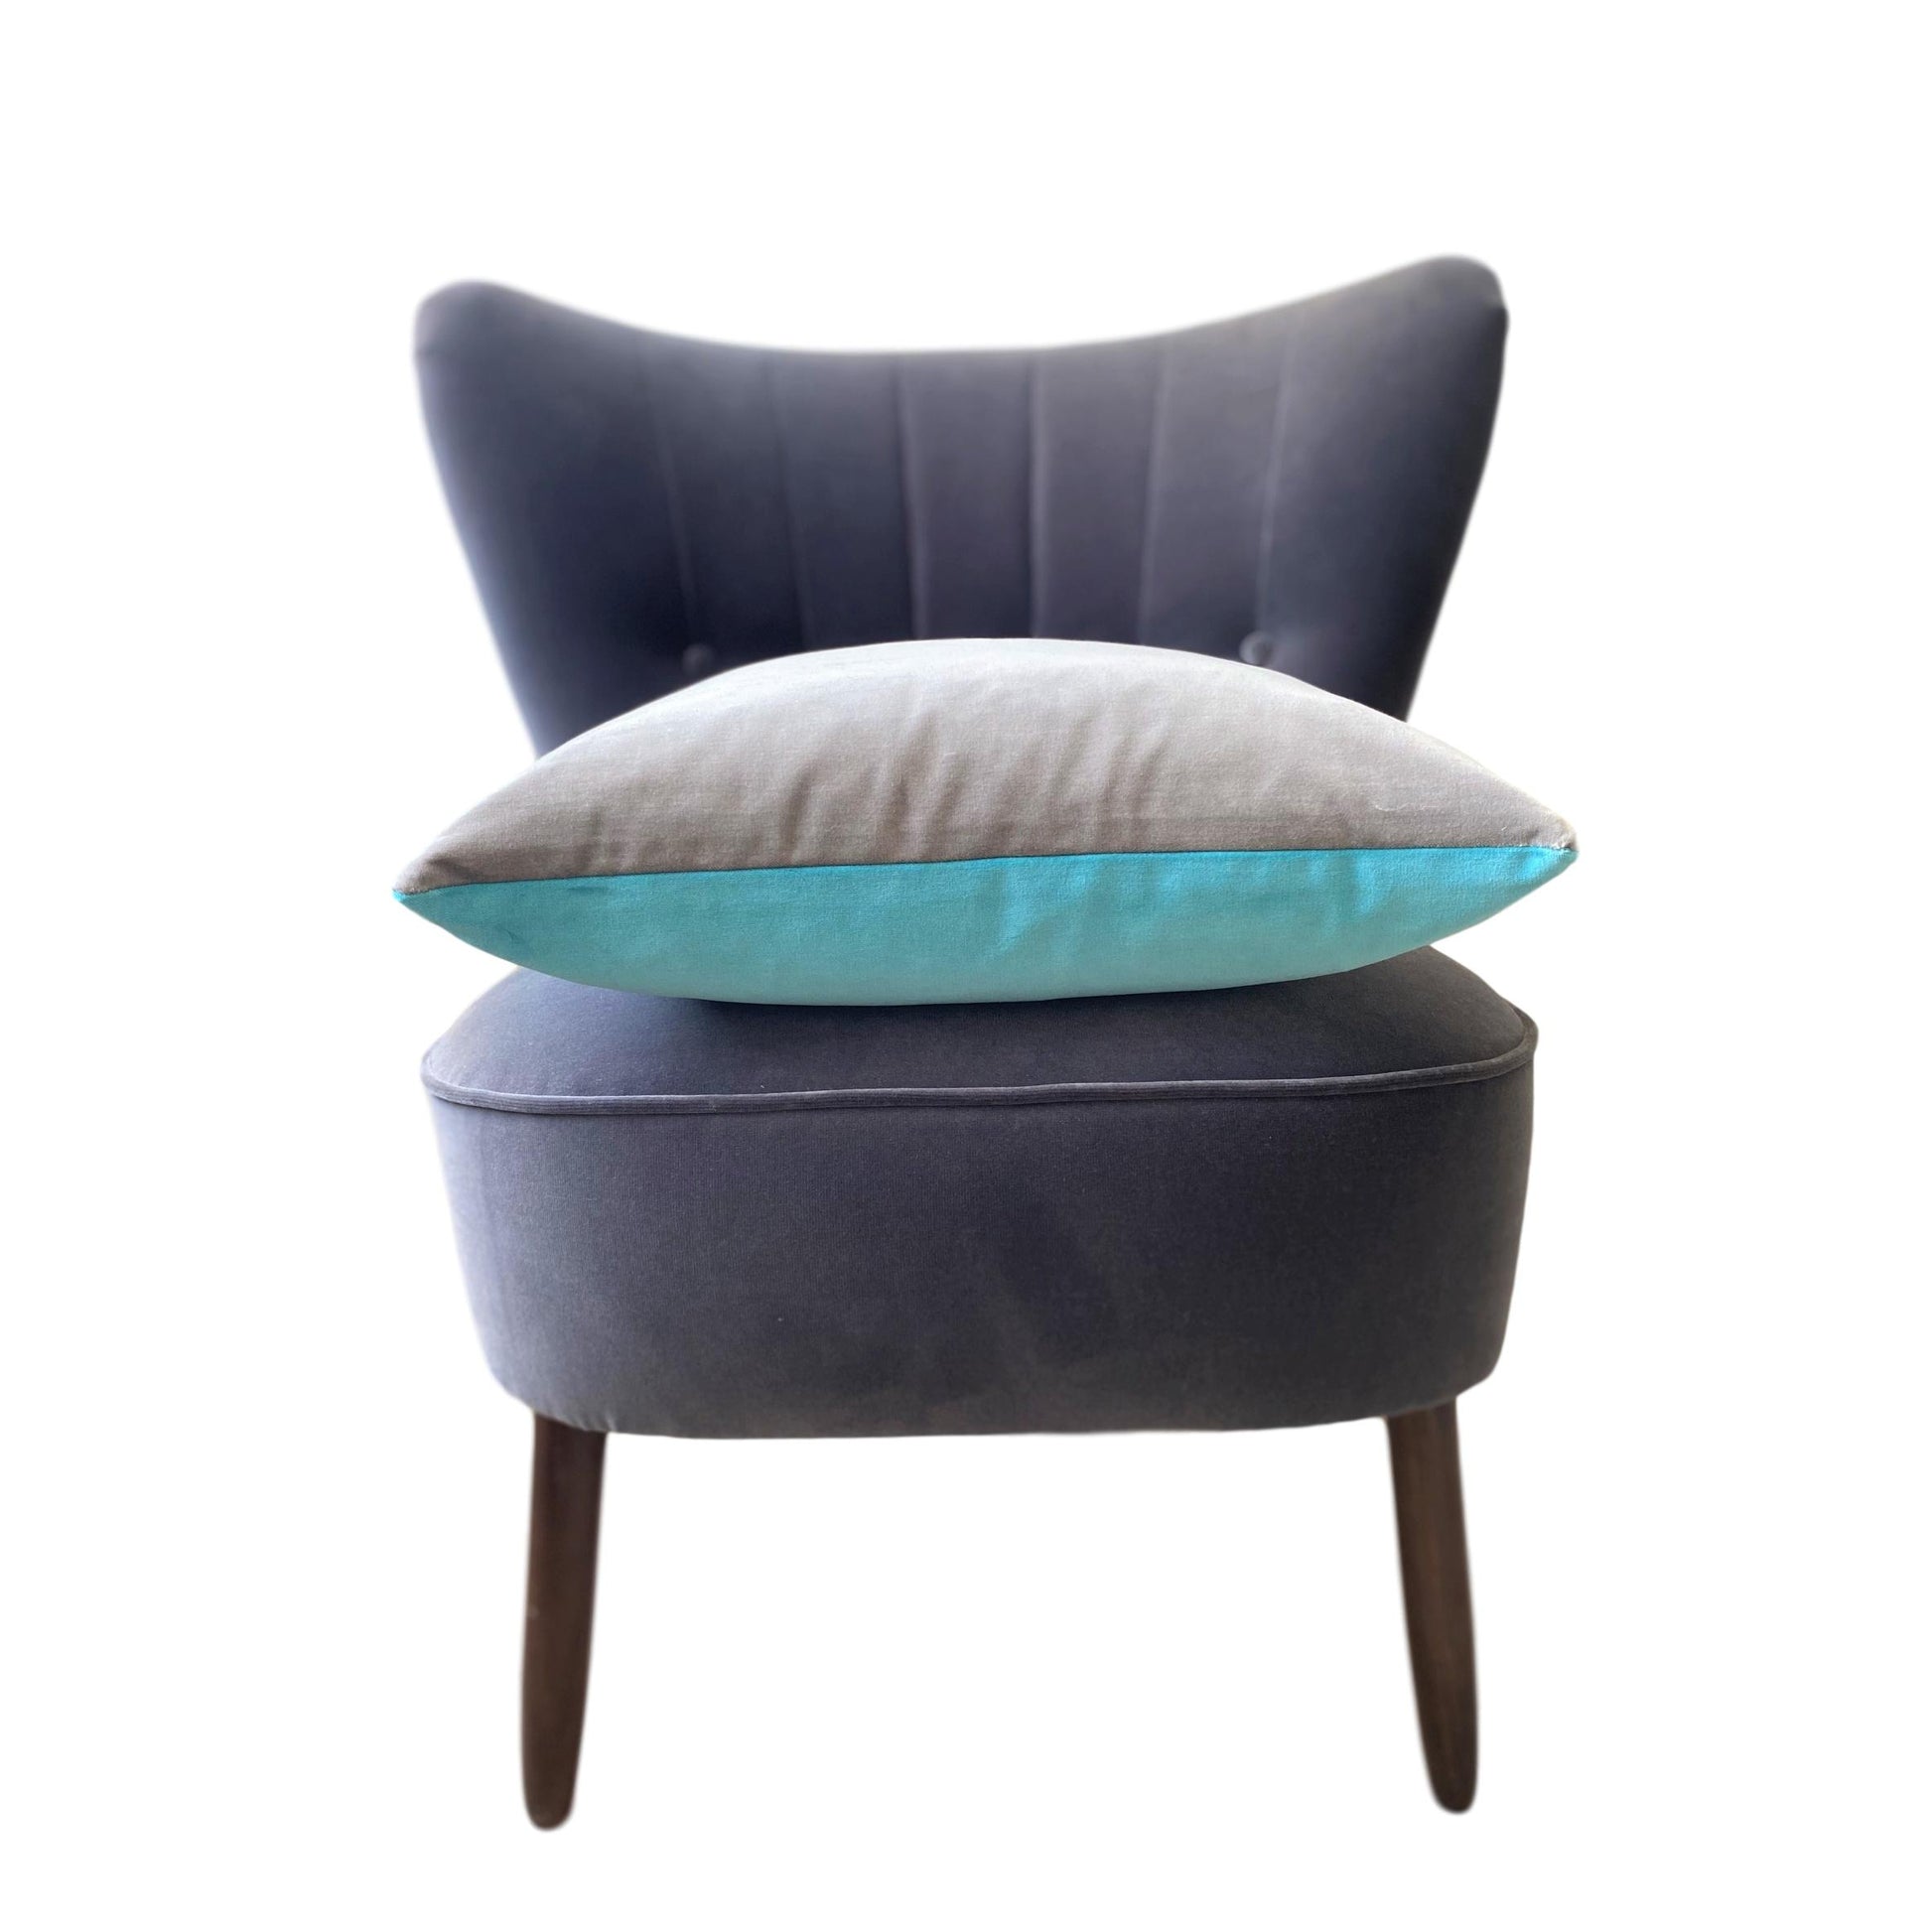 Turquoise and grey cushions by luxe 39